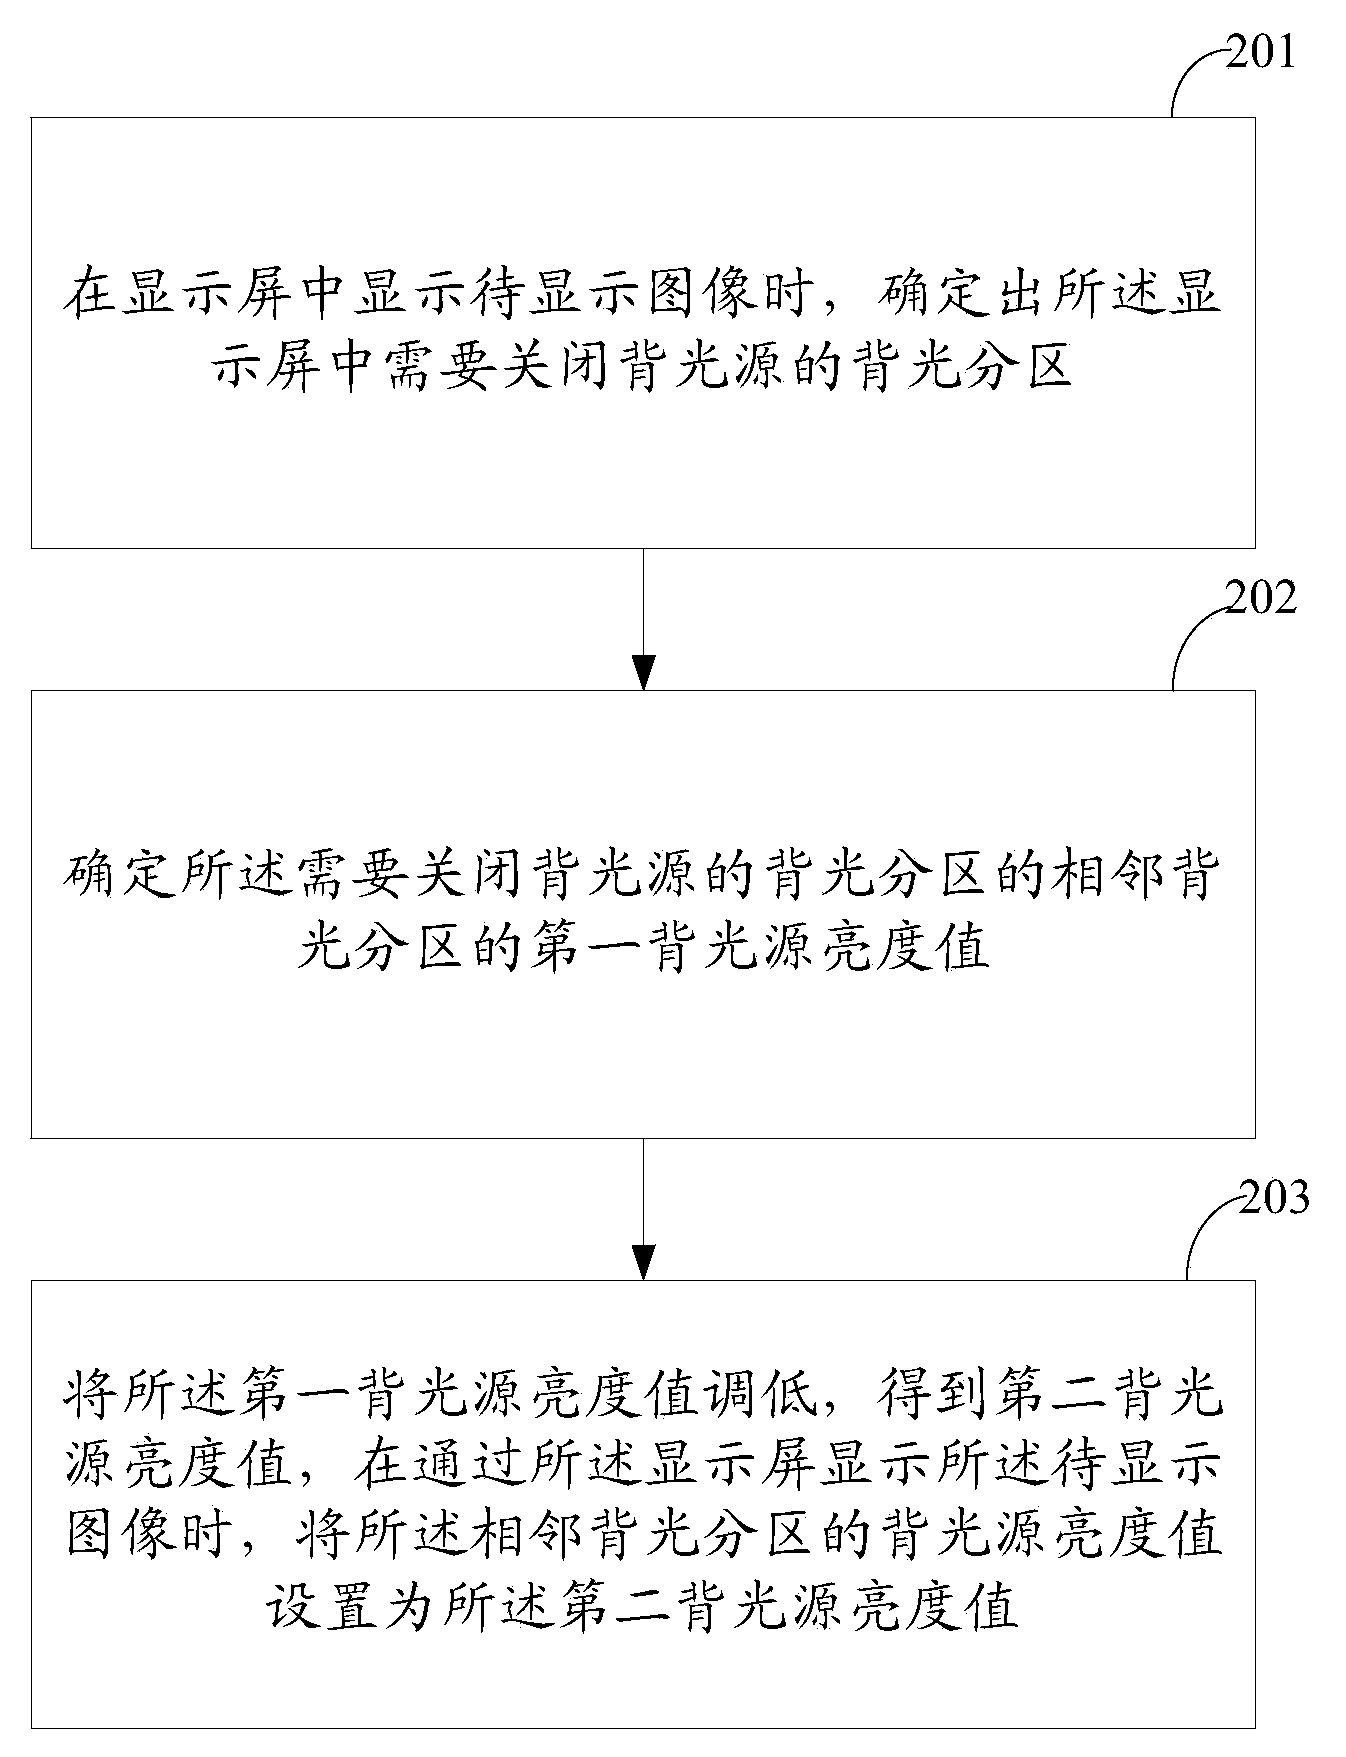 Backlight source luminance control method and device used under wide-screen film display mode